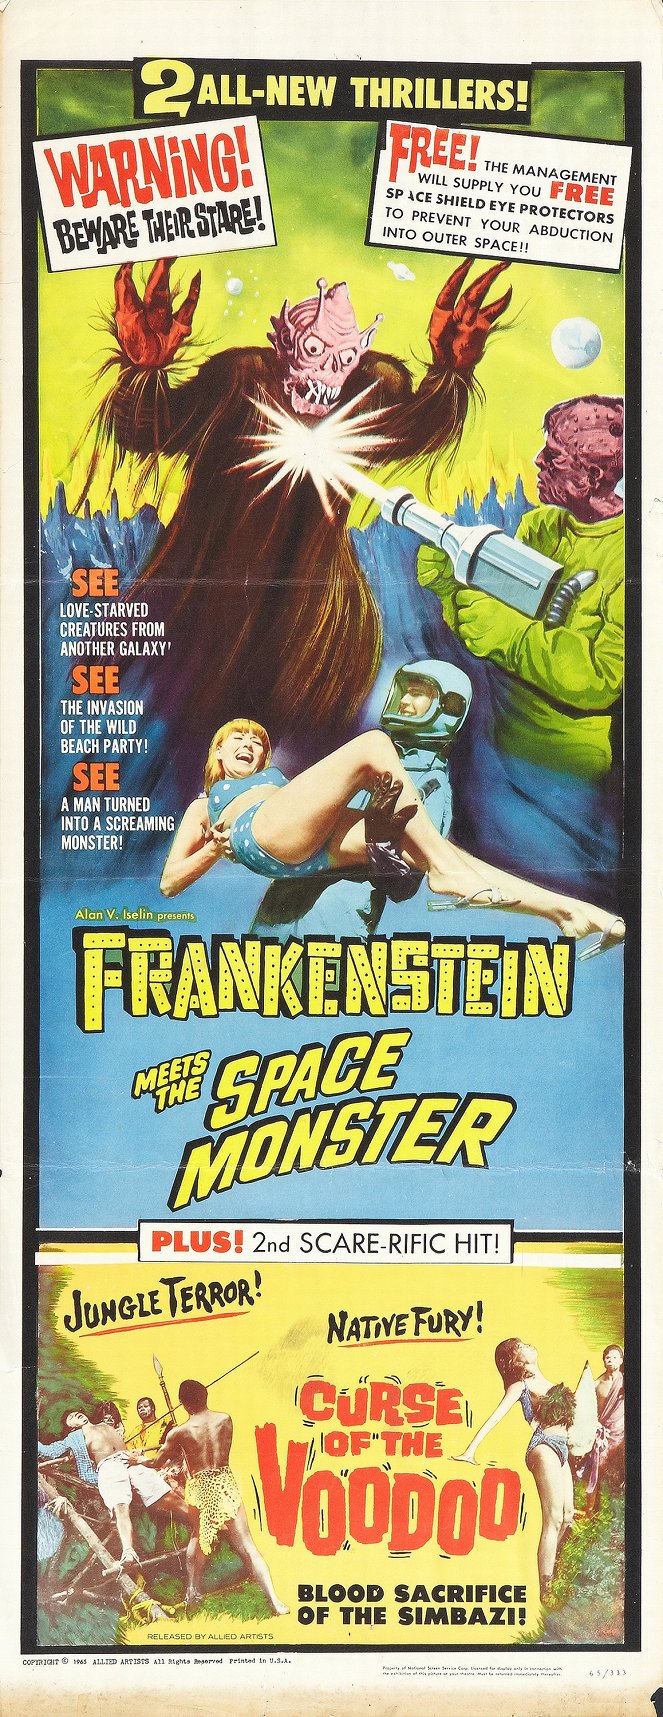 Frankenstein Meets the Space Monster - Posters